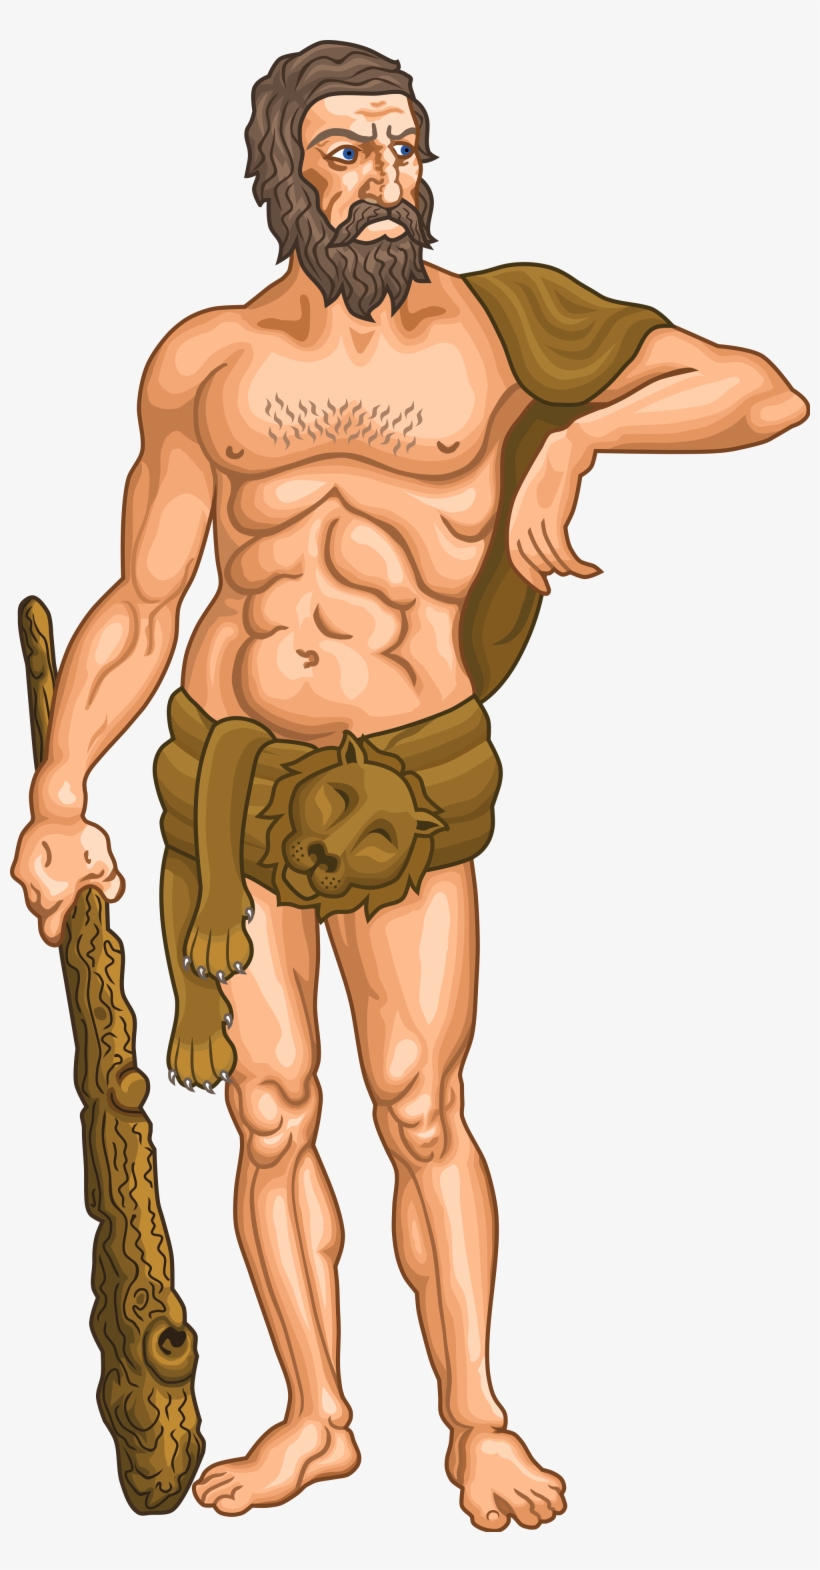 Hercules Png Image Background - Man Supporter Coat Of Arms, transparent png #2862194